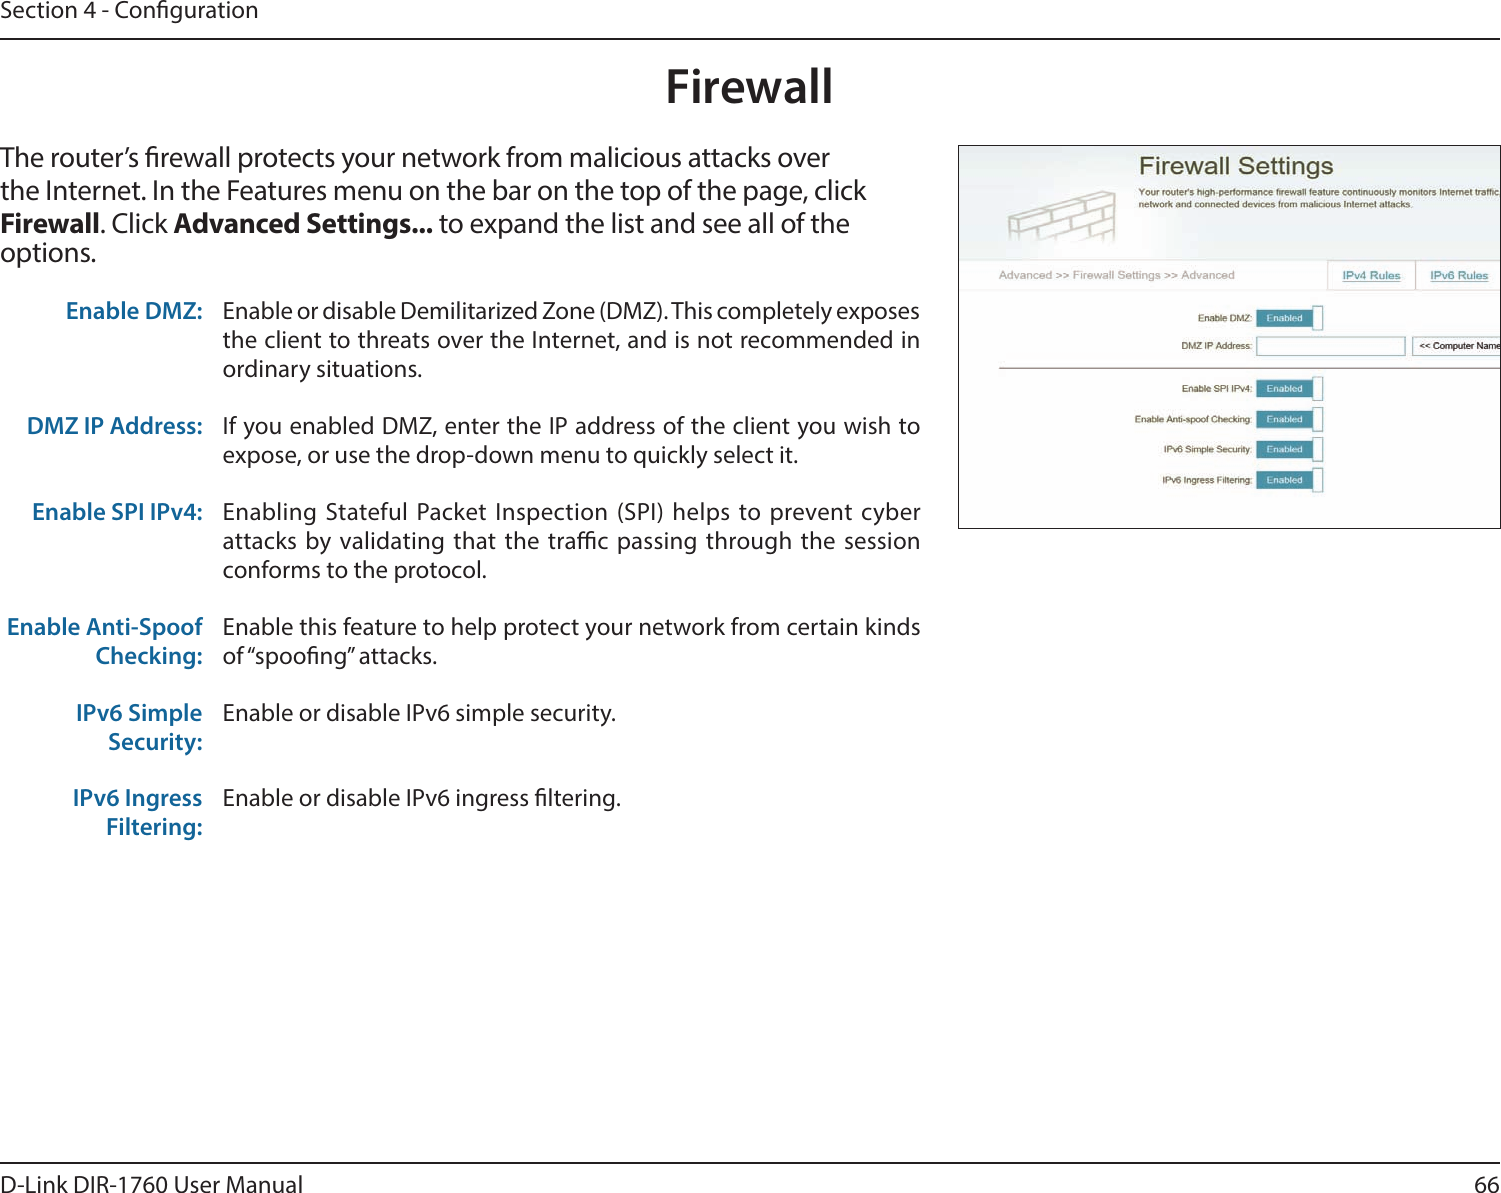 66D-Link DIR-1760 User ManualSection 4 - CongurationFirewallThe router’s rewall protects your network from malicious attacks over the Internet. In the Features menu on the bar on the top of the page, click Firewall. Click Advanced Settings... to expand the list and see all of the options. Enable DMZ: Enable or disable Demilitarized Zone (DMZ). This completely exposes the client to threats over the Internet, and is not recommended in ordinary situations.DMZ IP Address: If you enabled DMZ, enter the IP address of the client you wish to expose, or use the drop-down menu to quickly select it.Enable SPI IPv4: Enabling Stateful Packet Inspection (SPI) helps to prevent cyber attacks by validating that the trac passing through the session conforms to the protocol.Enable Anti-Spoof Checking:Enable this feature to help protect your network from certain kinds of “spoong” attacks.IPv6 Simple Security:Enable or disable IPv6 simple security.IPv6 Ingress Filtering:Enable or disable IPv6 ingress ltering.